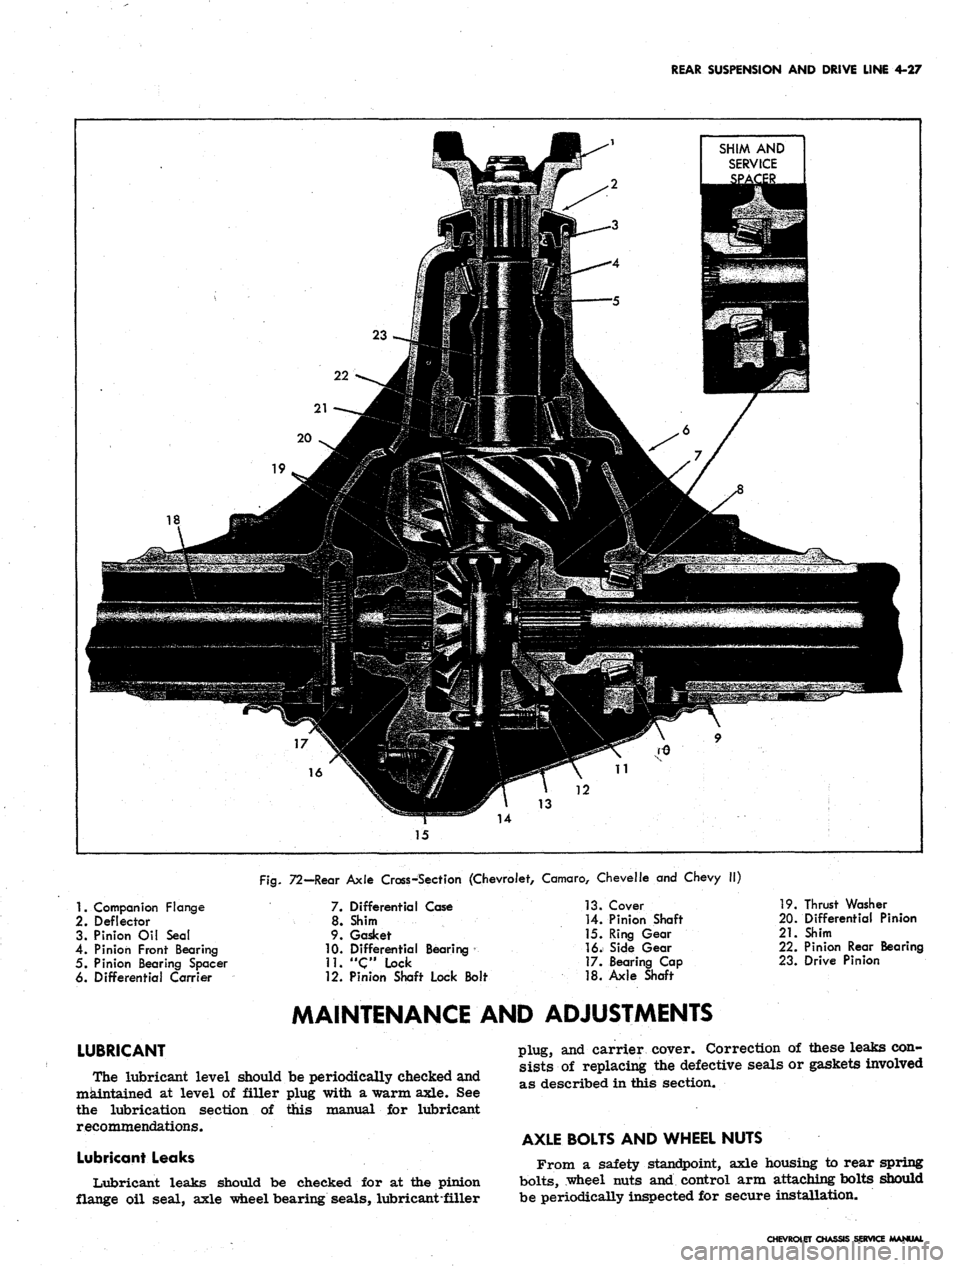 CHEVROLET CAMARO 1967 1.G Chassis Workshop Manual 
REAR SUSPENSION AND DRIVE LINE 4-27

SHIM AND

SERVICE

12

14

Fig.
 72—Rear Axle Cross-Section (Chevrolet, Camaro, Chevelle and Chevy II)

1.
 Companion Flange

2.
 Deflector

3. Pinion Oil Seal
